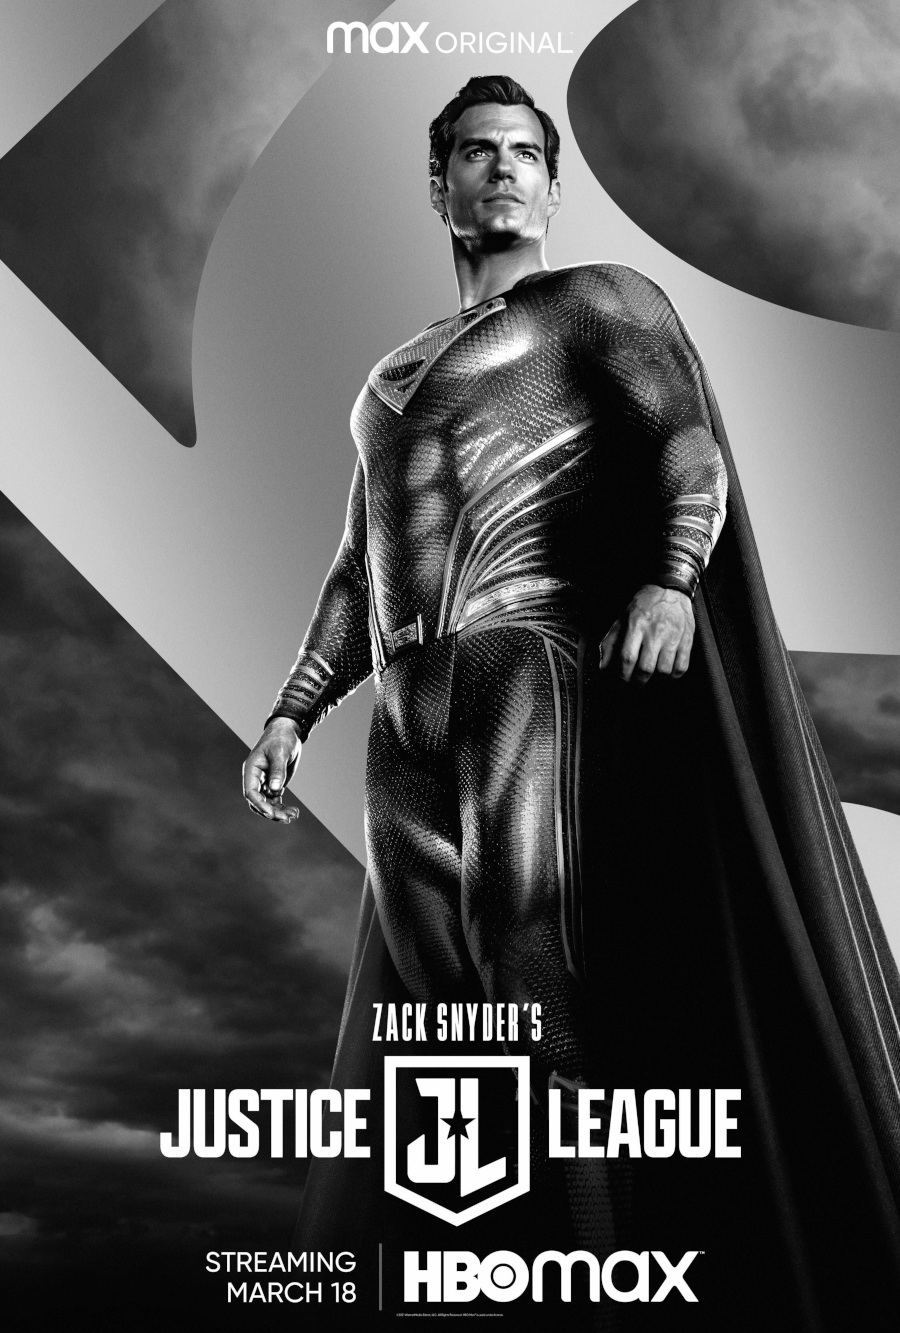 Superman Henry Cavill Zack Snyder's Justice league poster